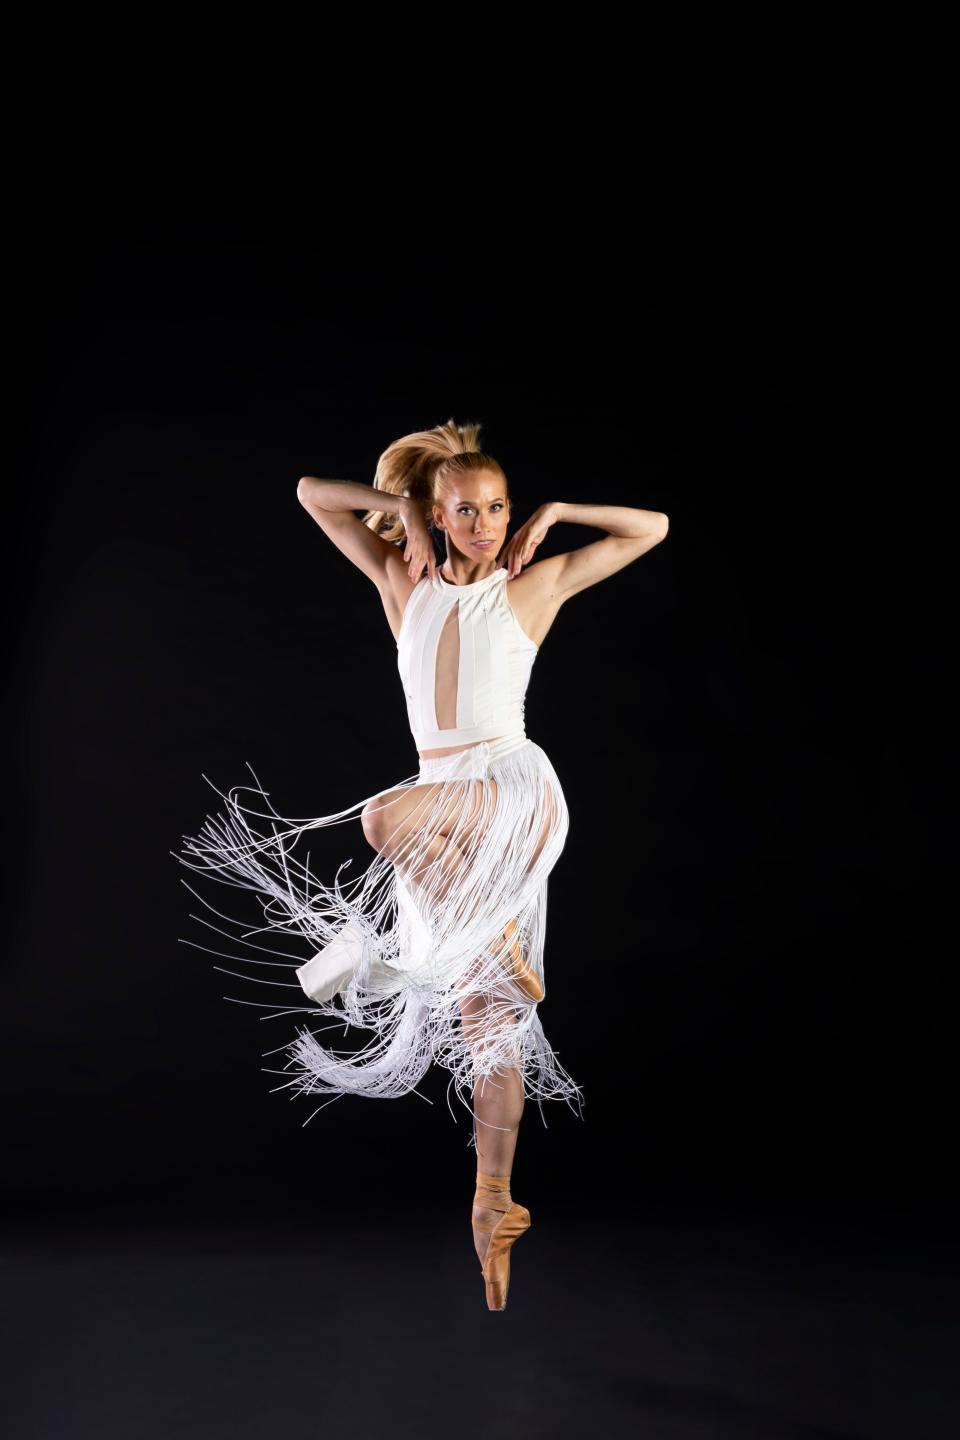 Danielle Brown performs in the world premiere of Richard House’s “Living Ghosts” for The Sarasota Ballet.